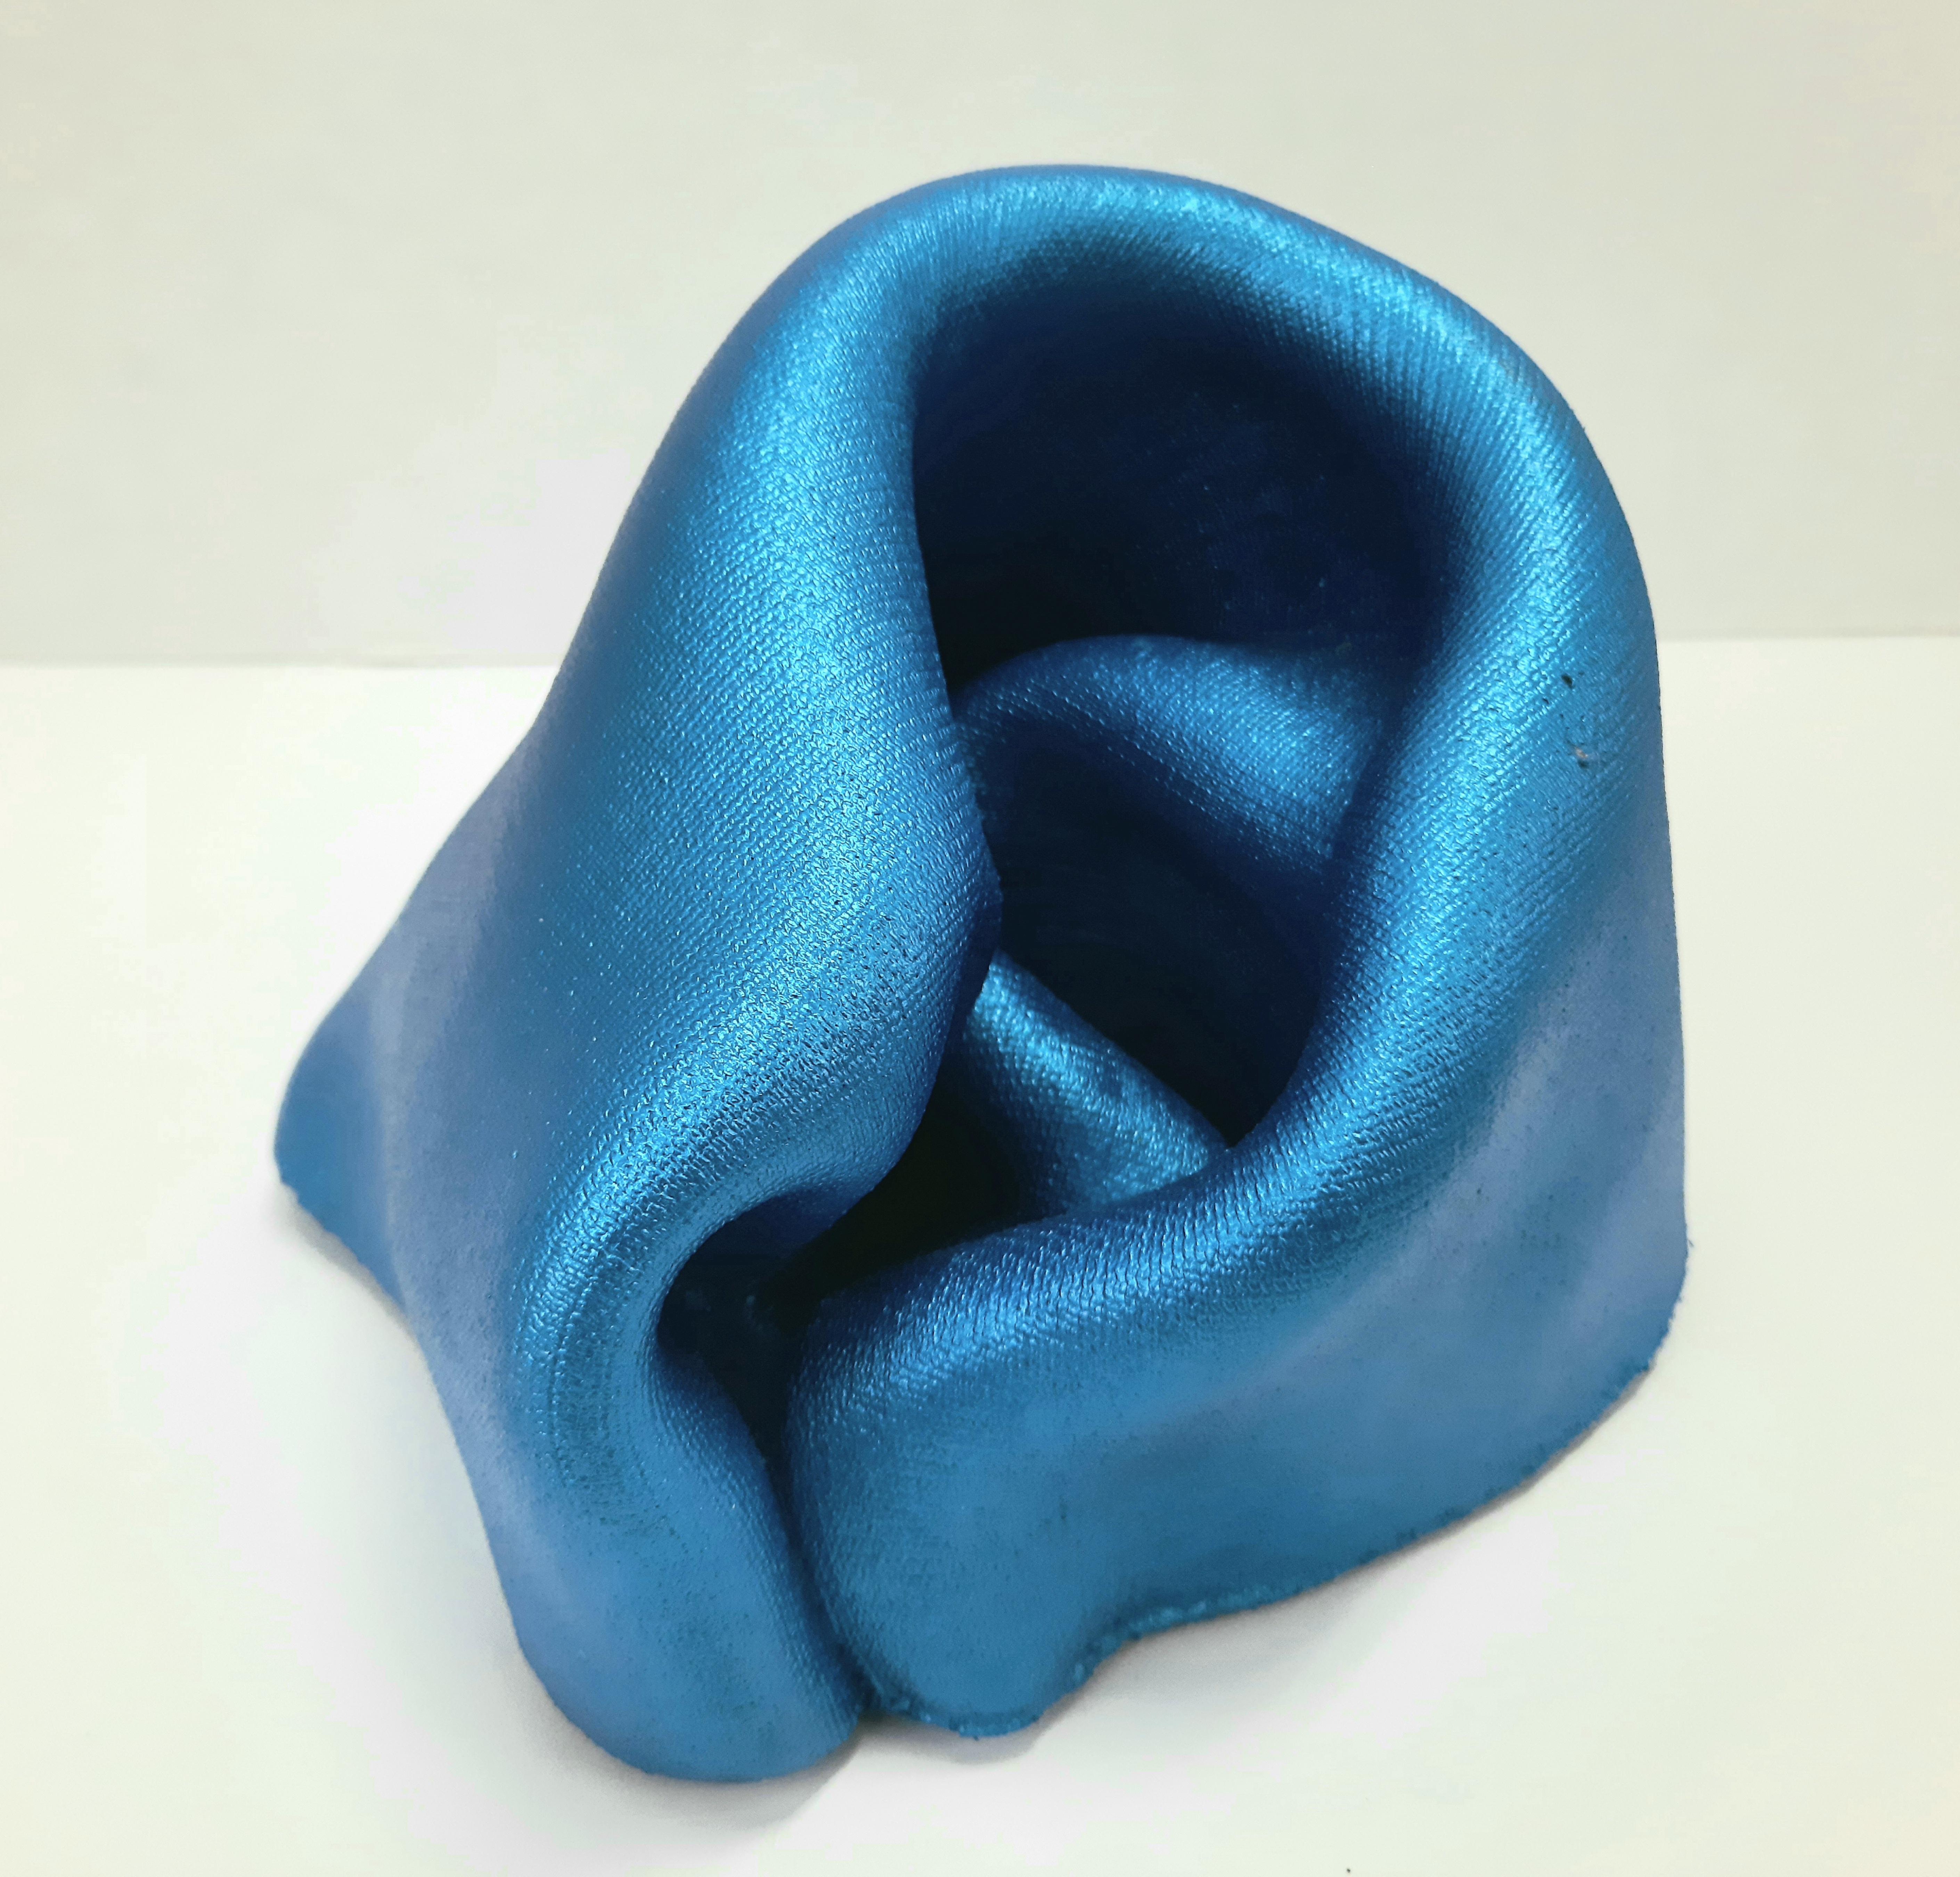 Ted VanCleave Abstract Sculpture - sinuosity 151 blue (pop art metallic smooth small sculpture abstract)